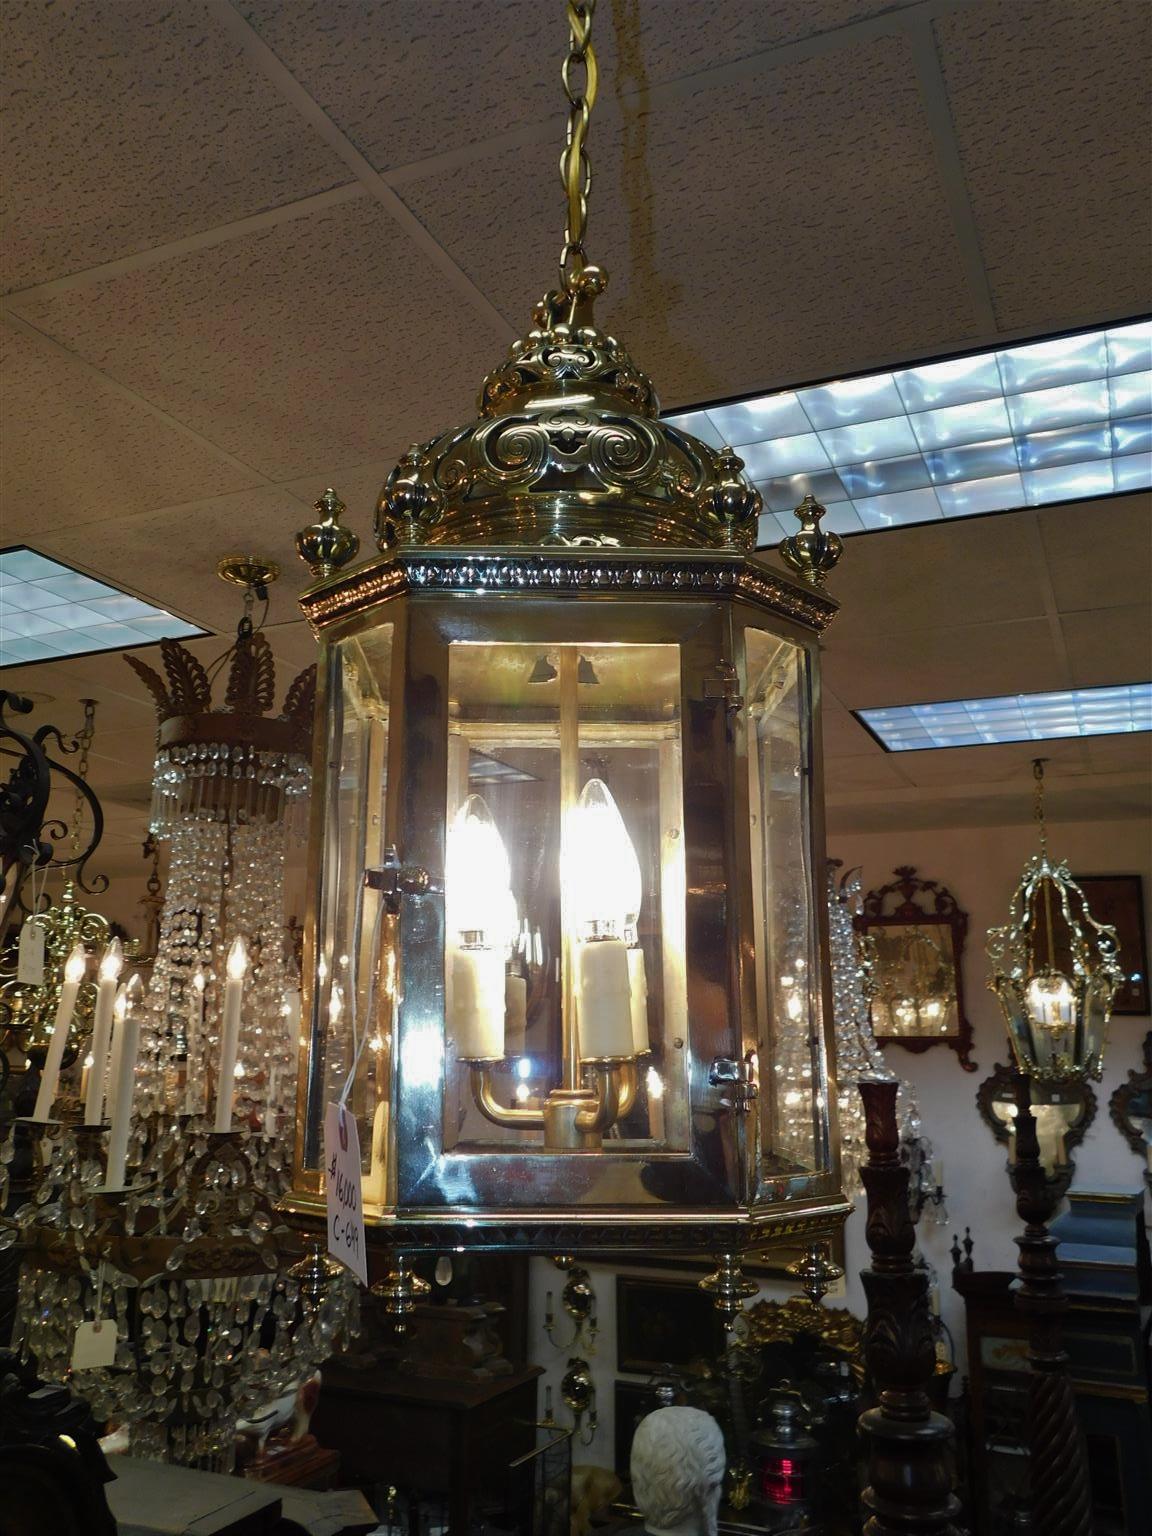 English brass octagon hanging hall lantern with a decorative chased and pierced two tiered bulbous beaded dome, paneled glass with a single hinged door, eight upper floral finials with a filigree border, three light interior cluster, eight lower